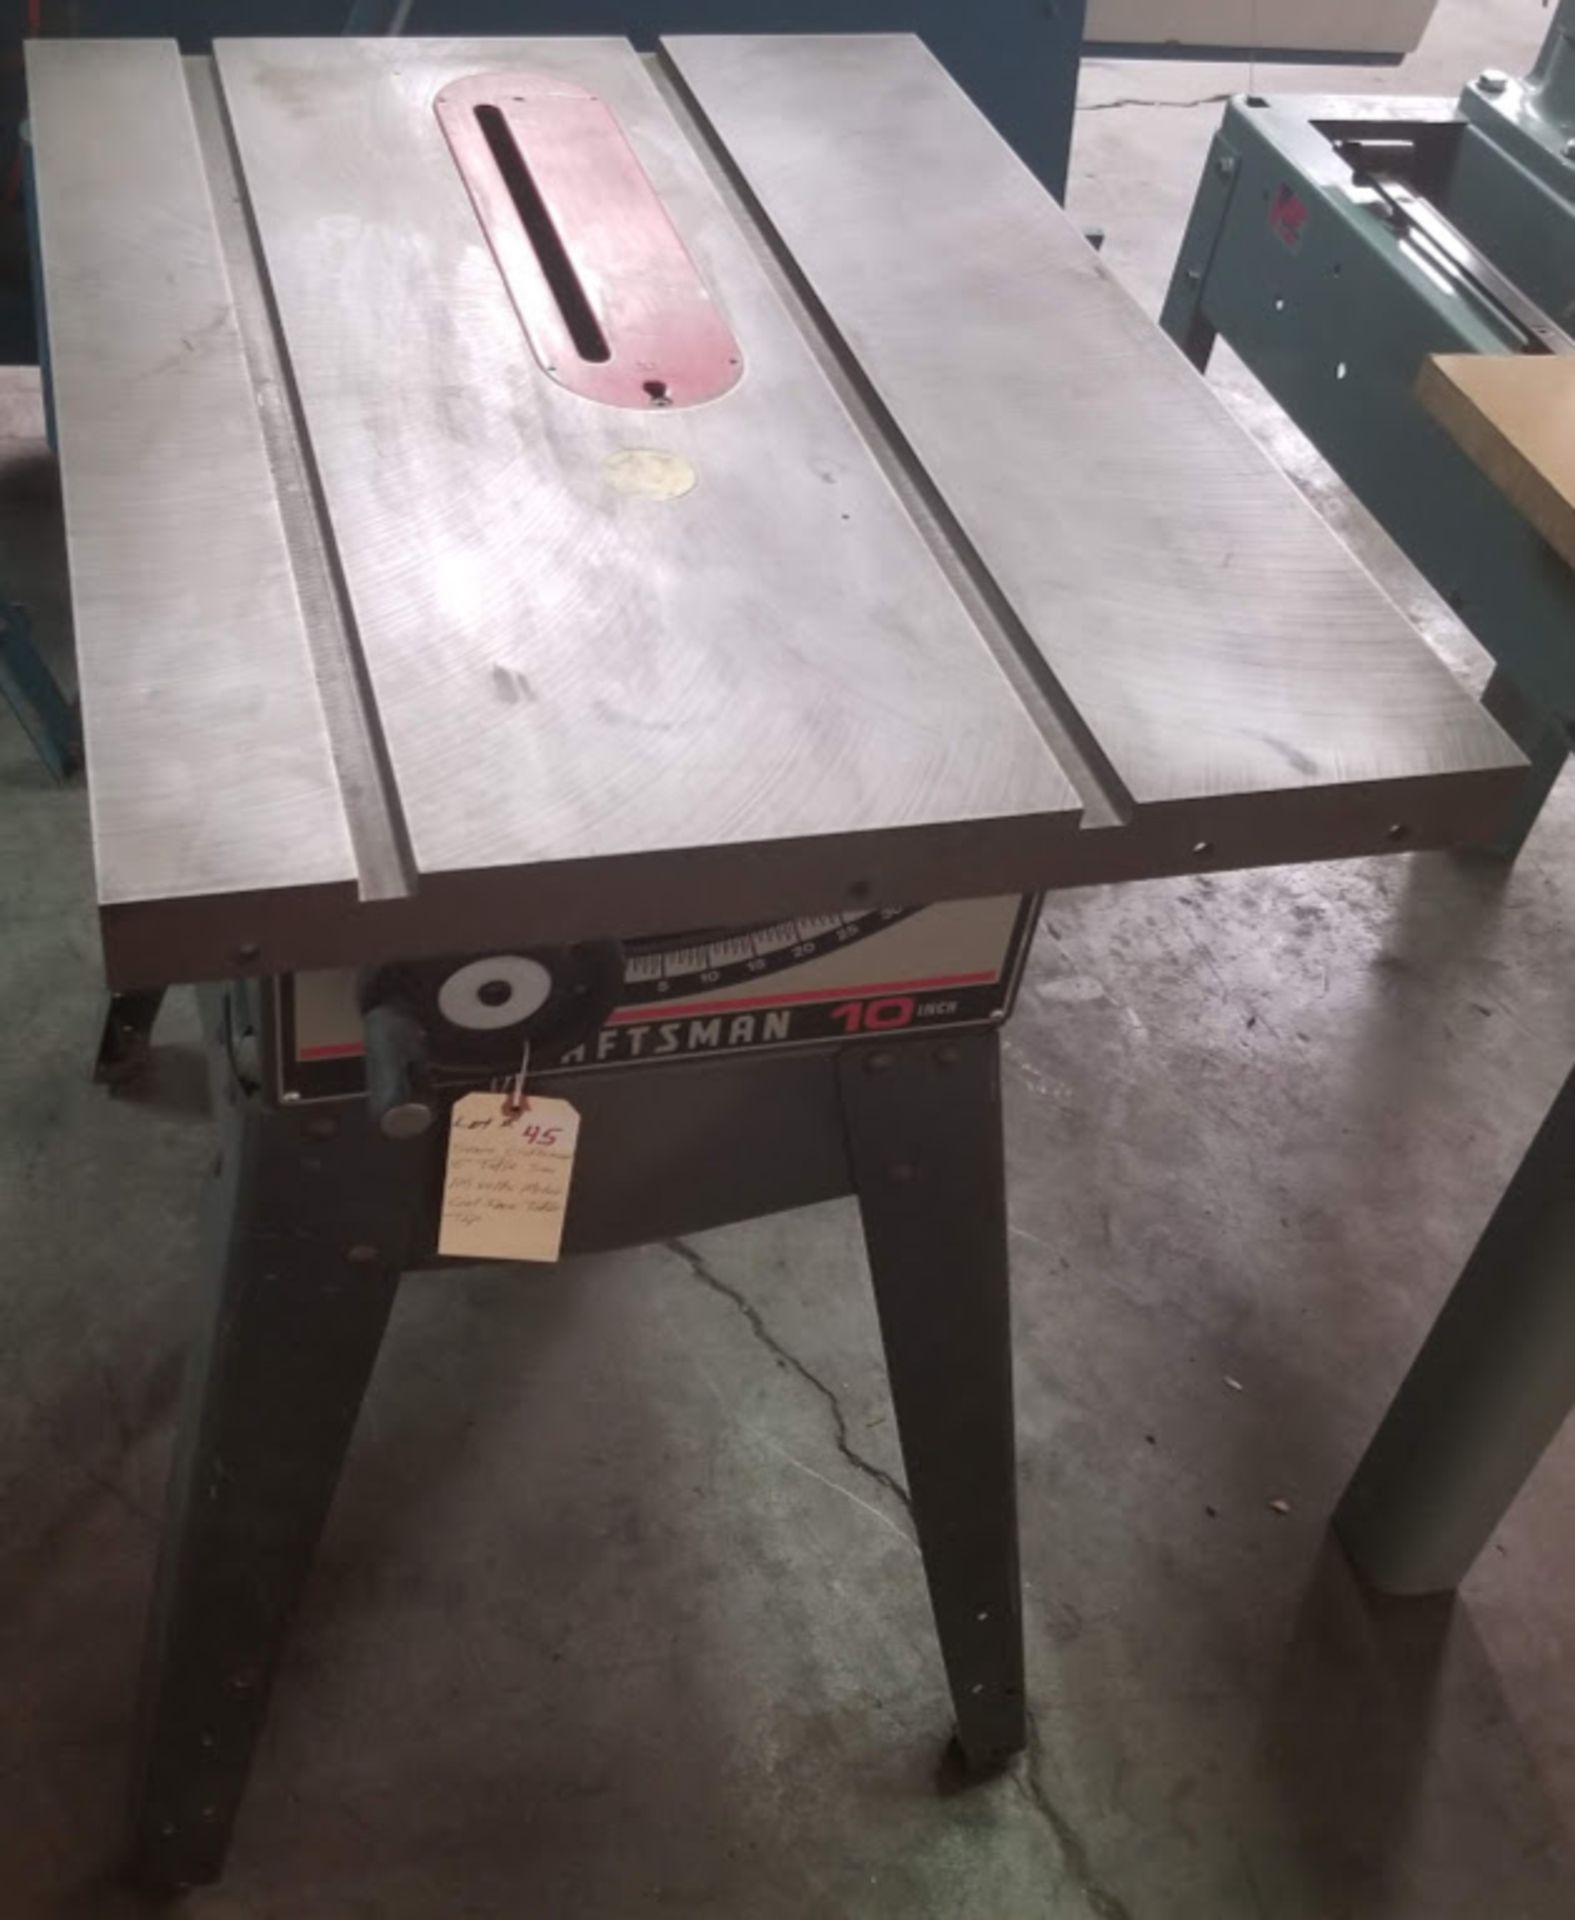 Sears Craftsman 10" Table Saw, 115 Volts Motor Cast Iron Table Top